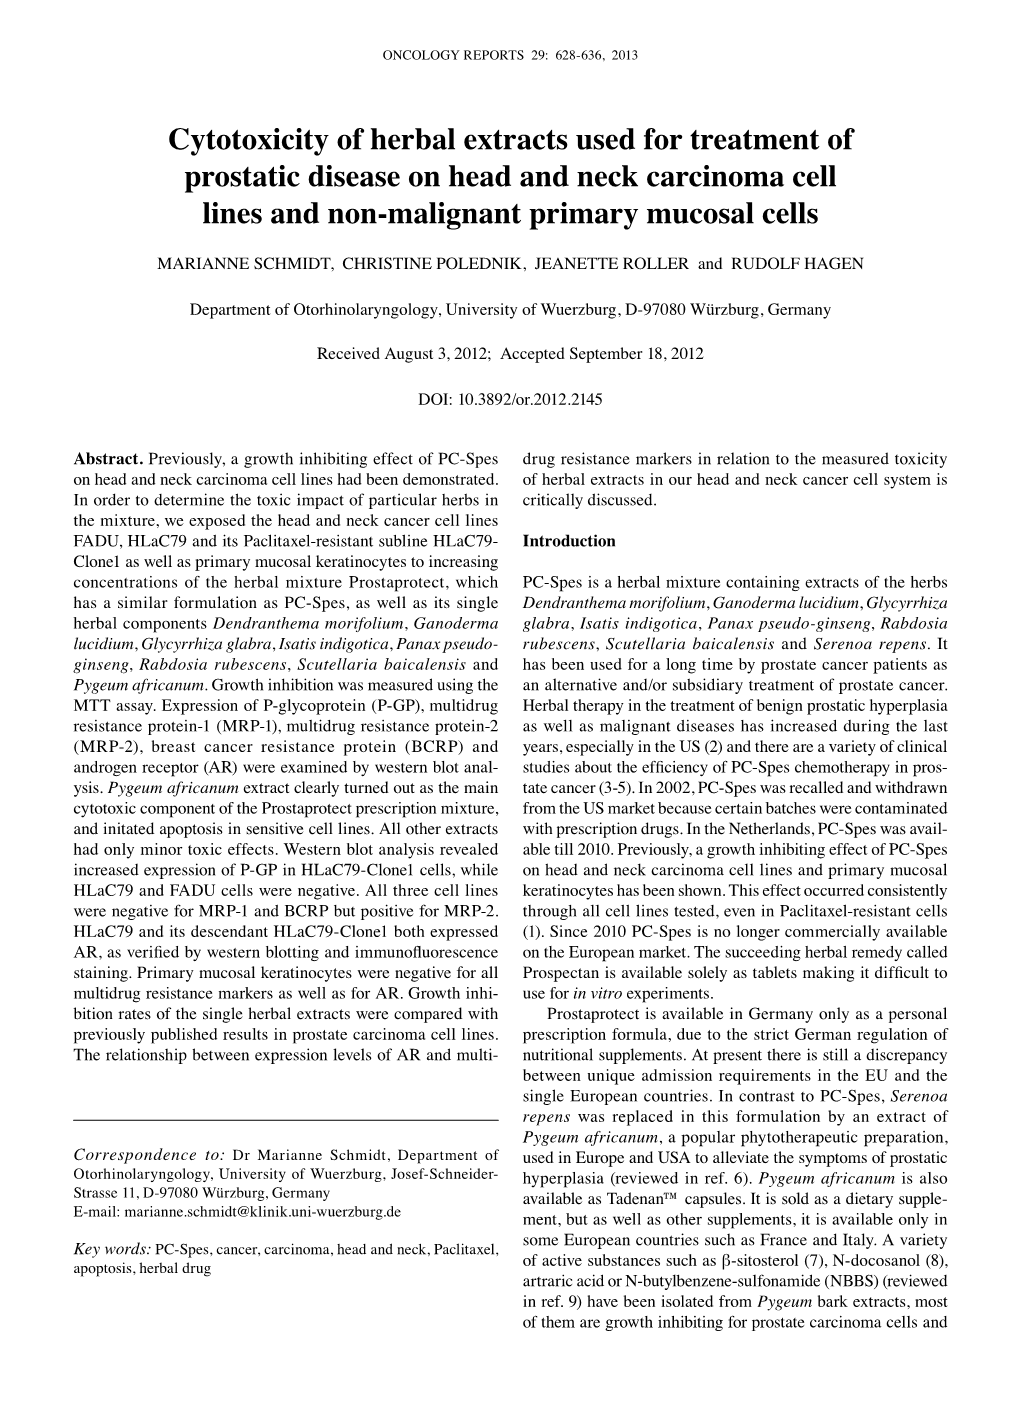 Cytotoxicity of Herbal Extracts Used for Treatment of Prostatic Disease on Head and Neck Carcinoma Cell Lines and Non-Malignant Primary Mucosal Cells